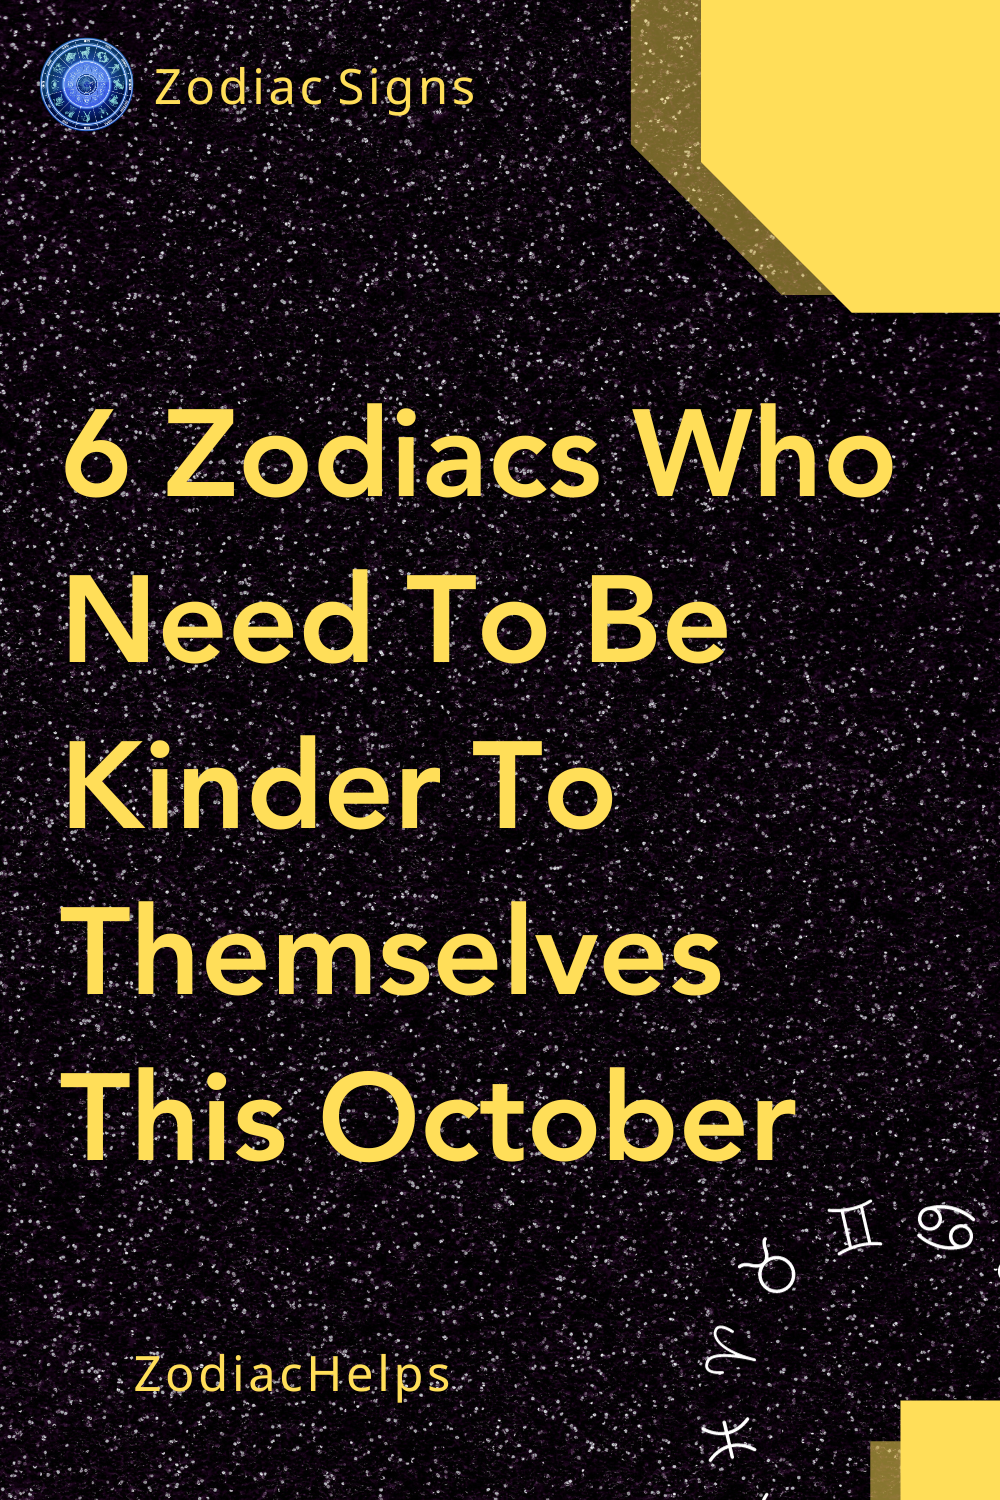 6 Zodiacs Who Need To Be Kinder To Themselves This October